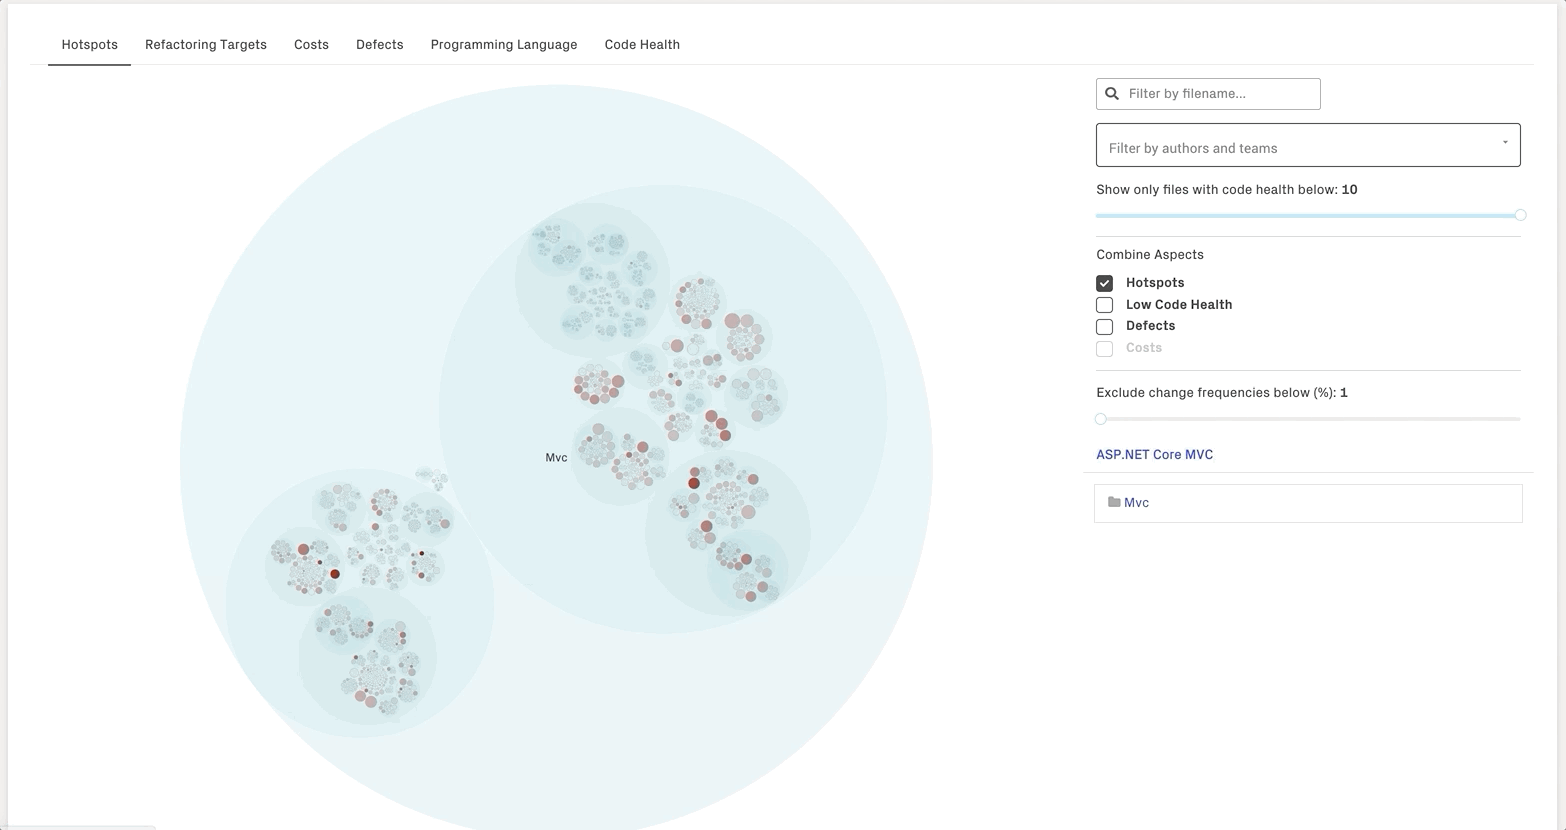 Filter the hotspots and code health visualization by team (or authors).